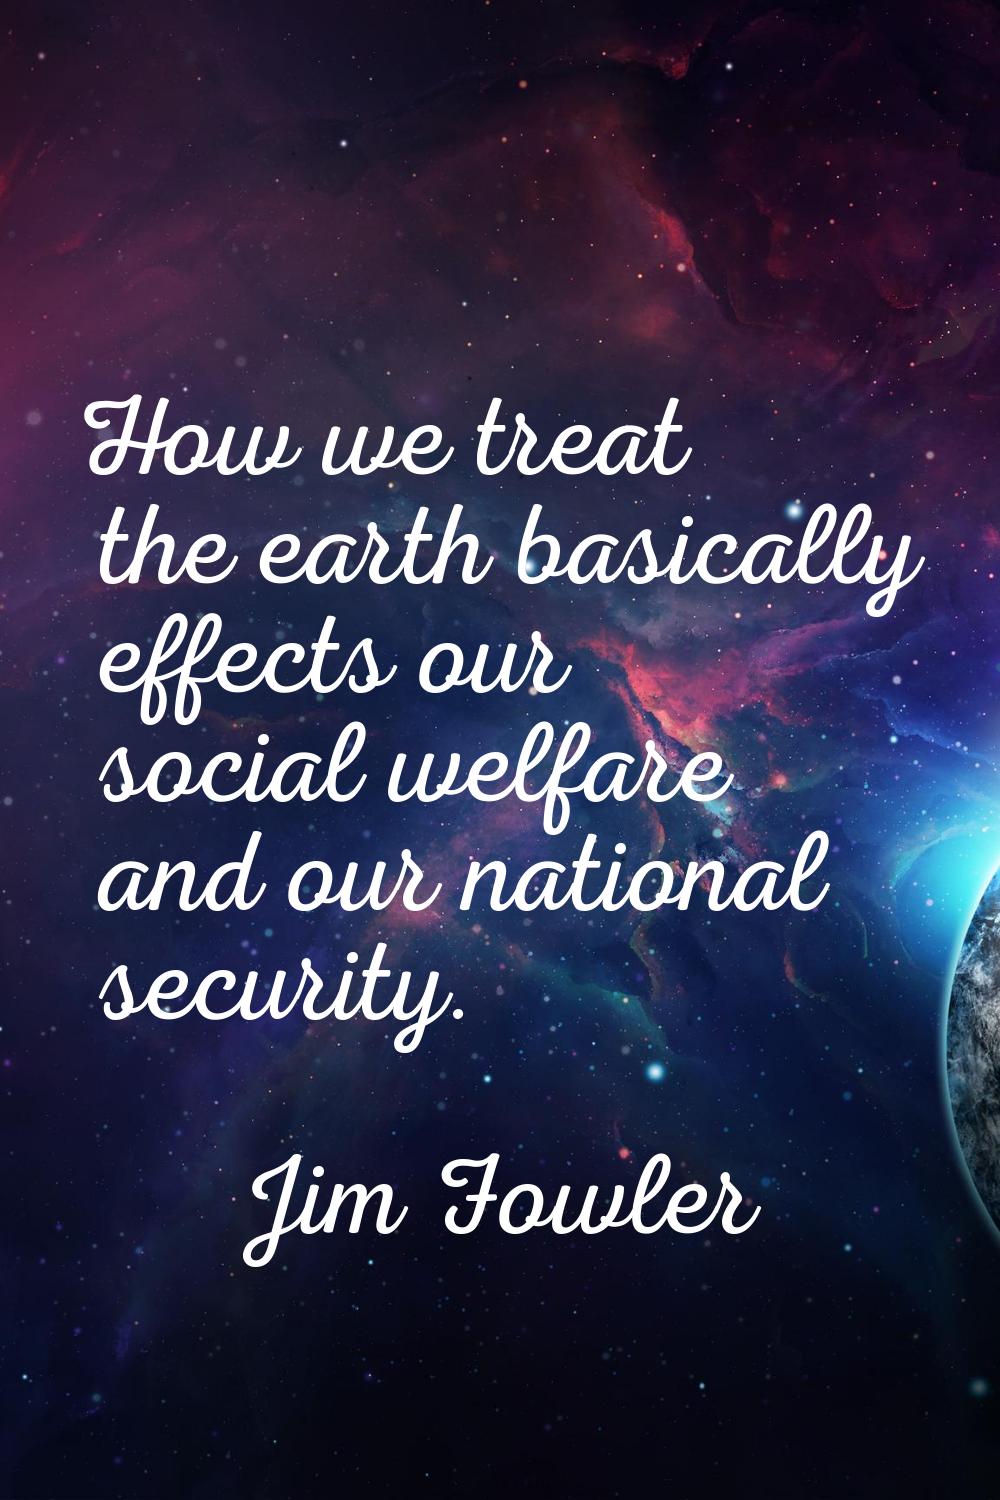 How we treat the earth basically effects our social welfare and our national security.